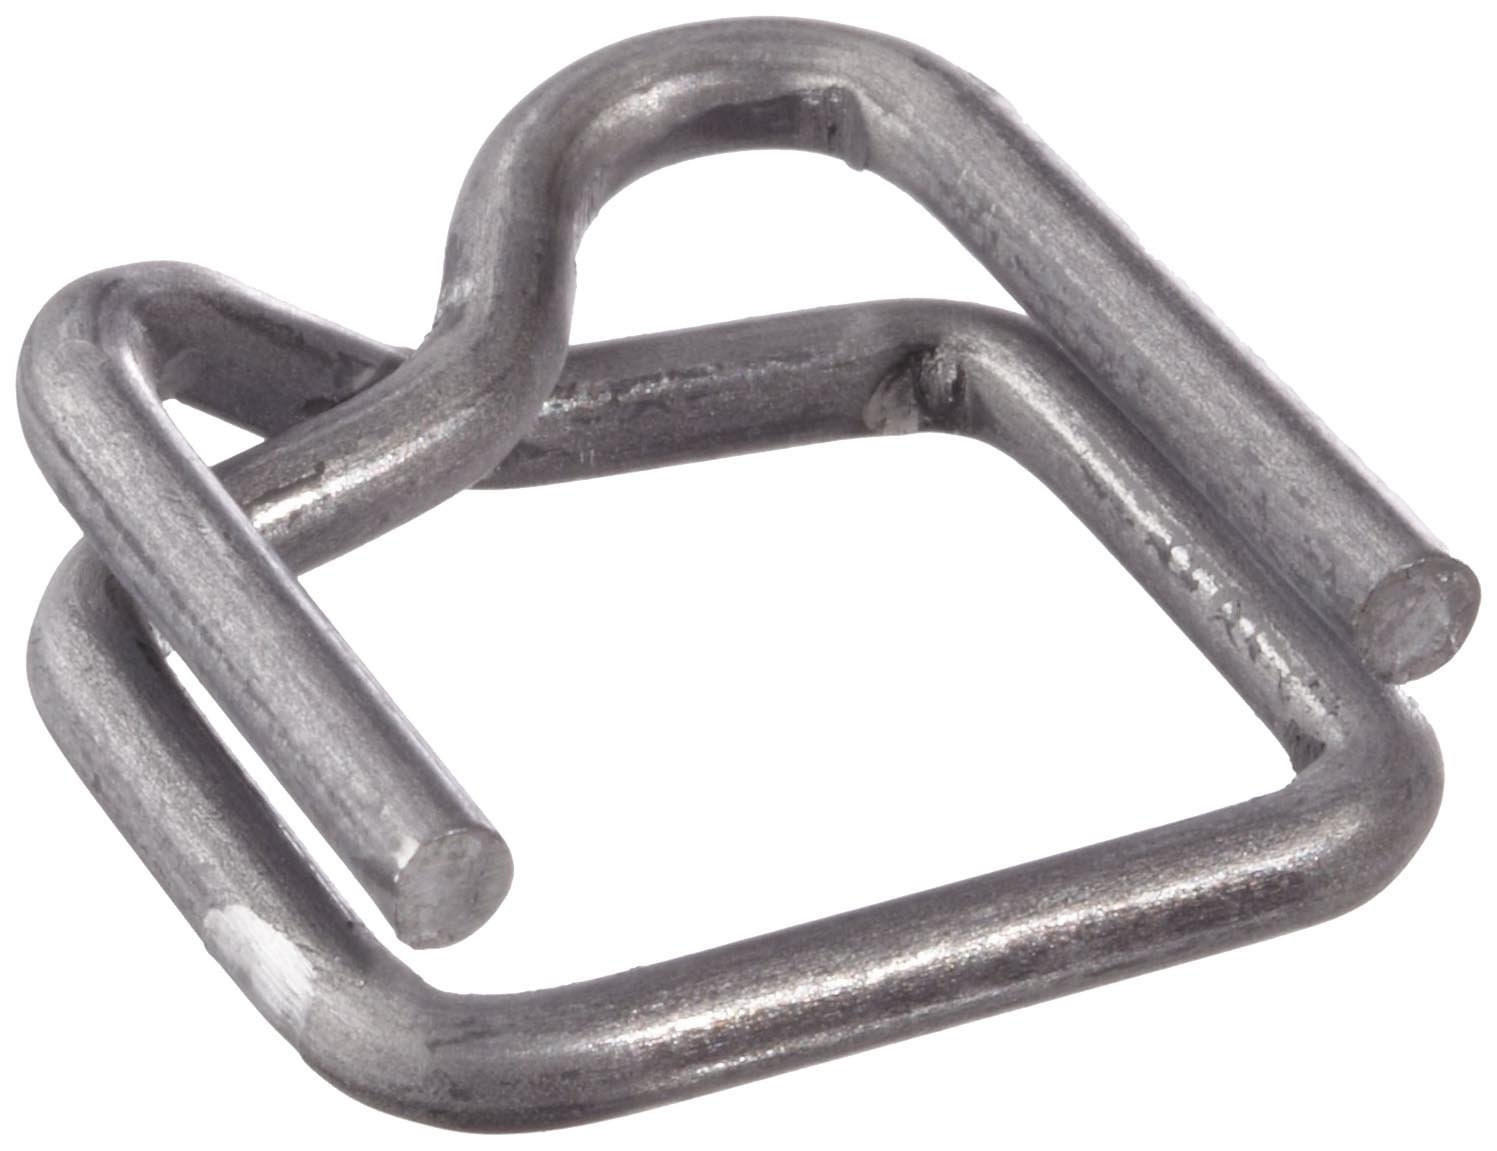 Metal Packing Strap Clips Buckle, Metal Seals